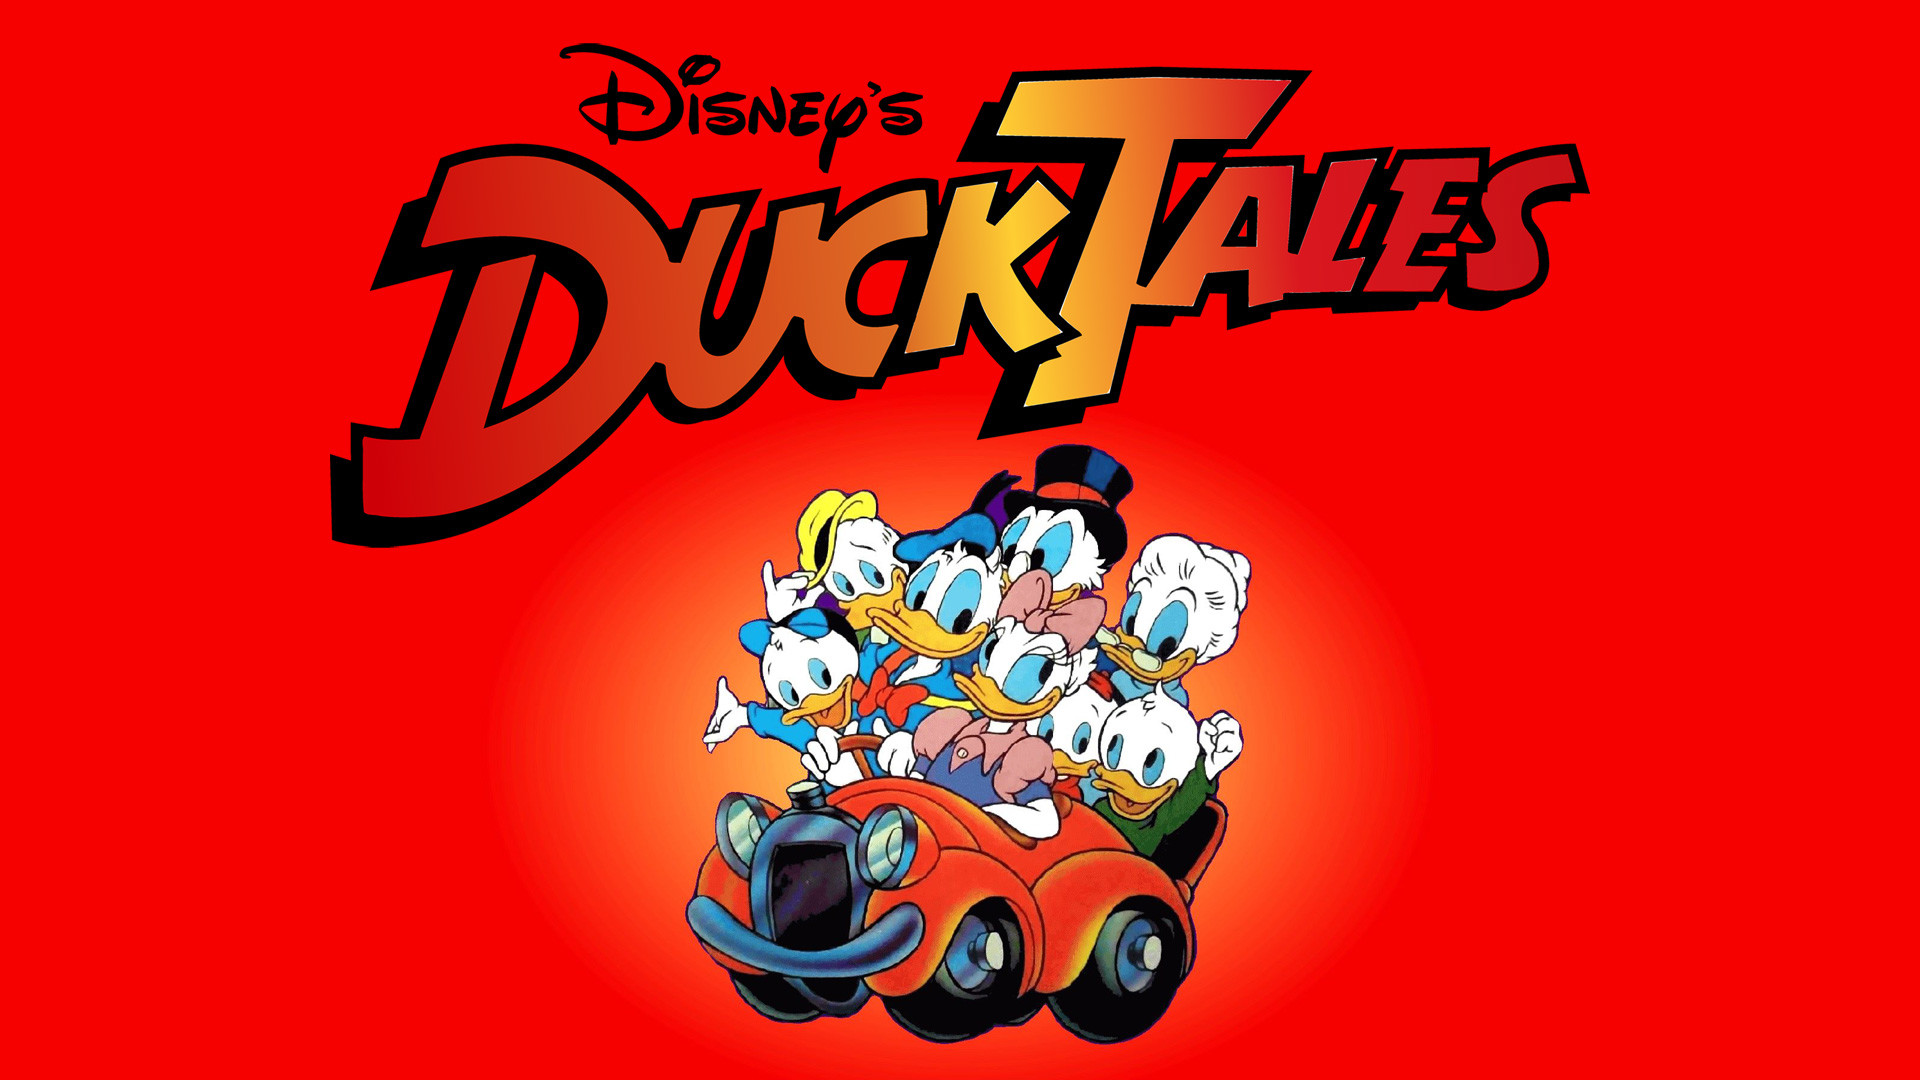 1920x1080 DuckTales HD Wallpapers | Backgrounds - Wallpaper Abyss